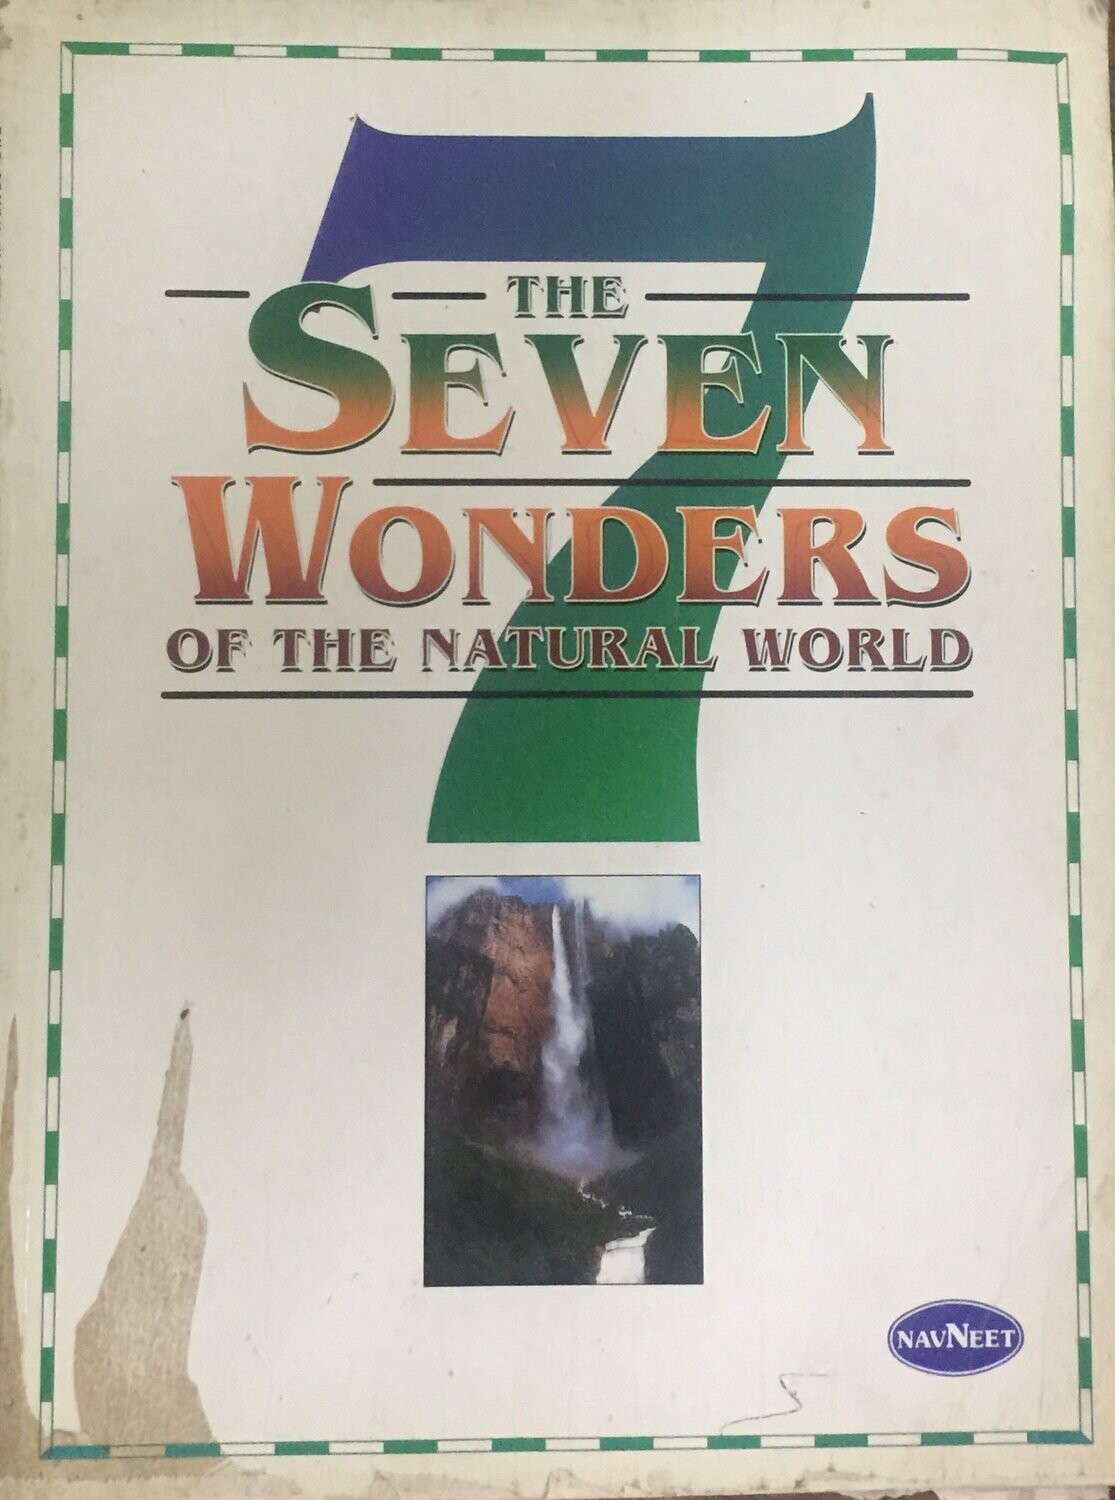 NAVNEET THE SEVEN WONDERS OF THE WORLD